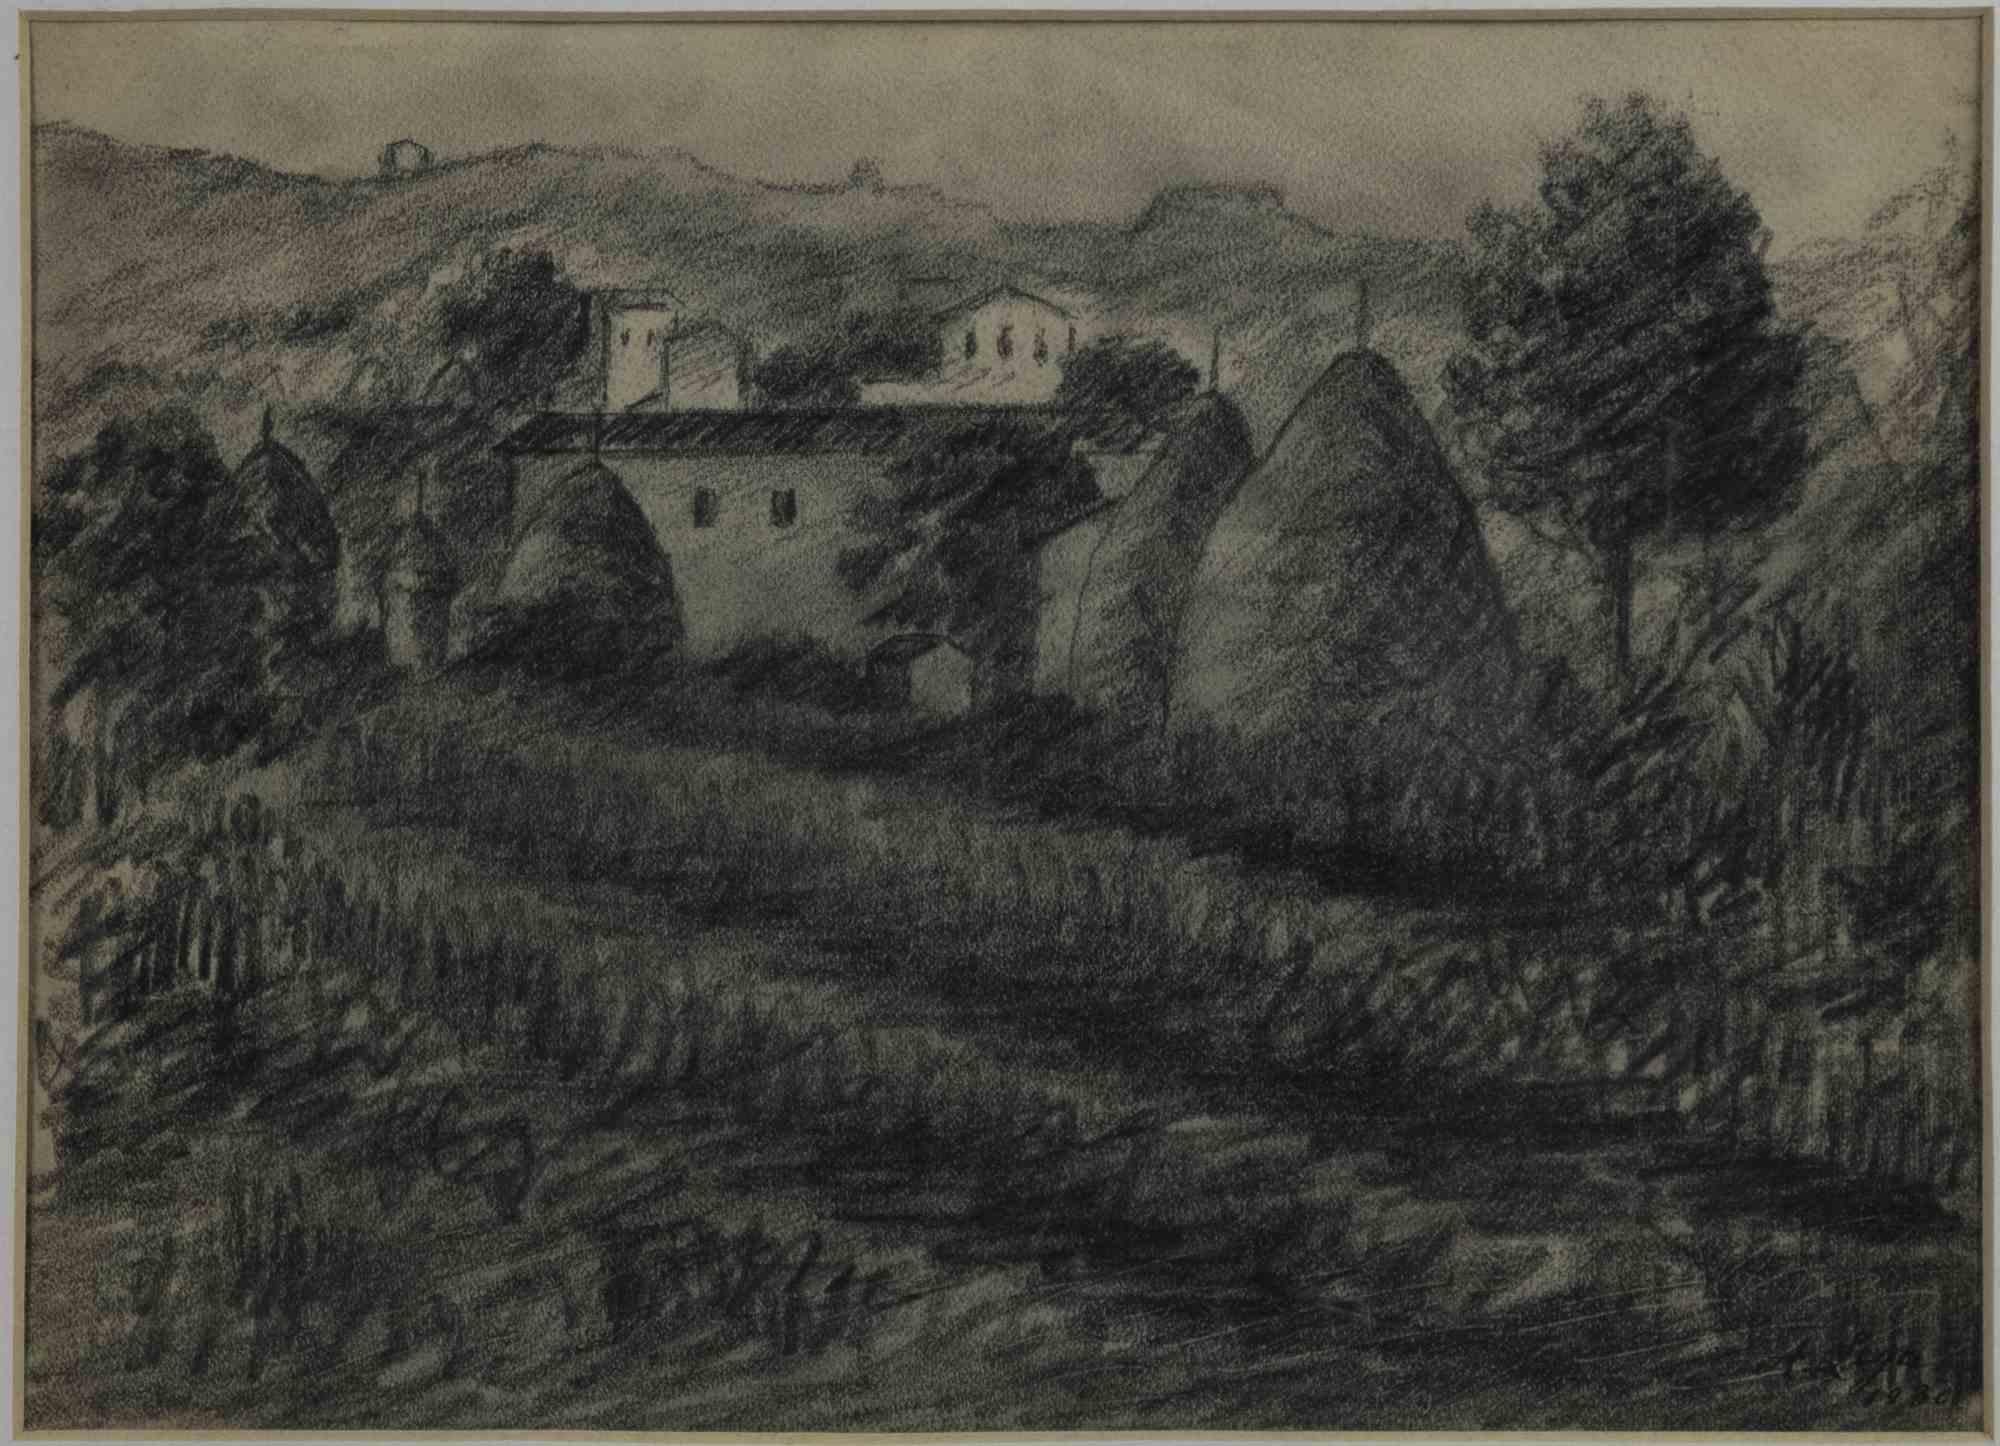 Unknown Figurative Art - Landscape - Charcoal Drawing by Achille Lega - 1928